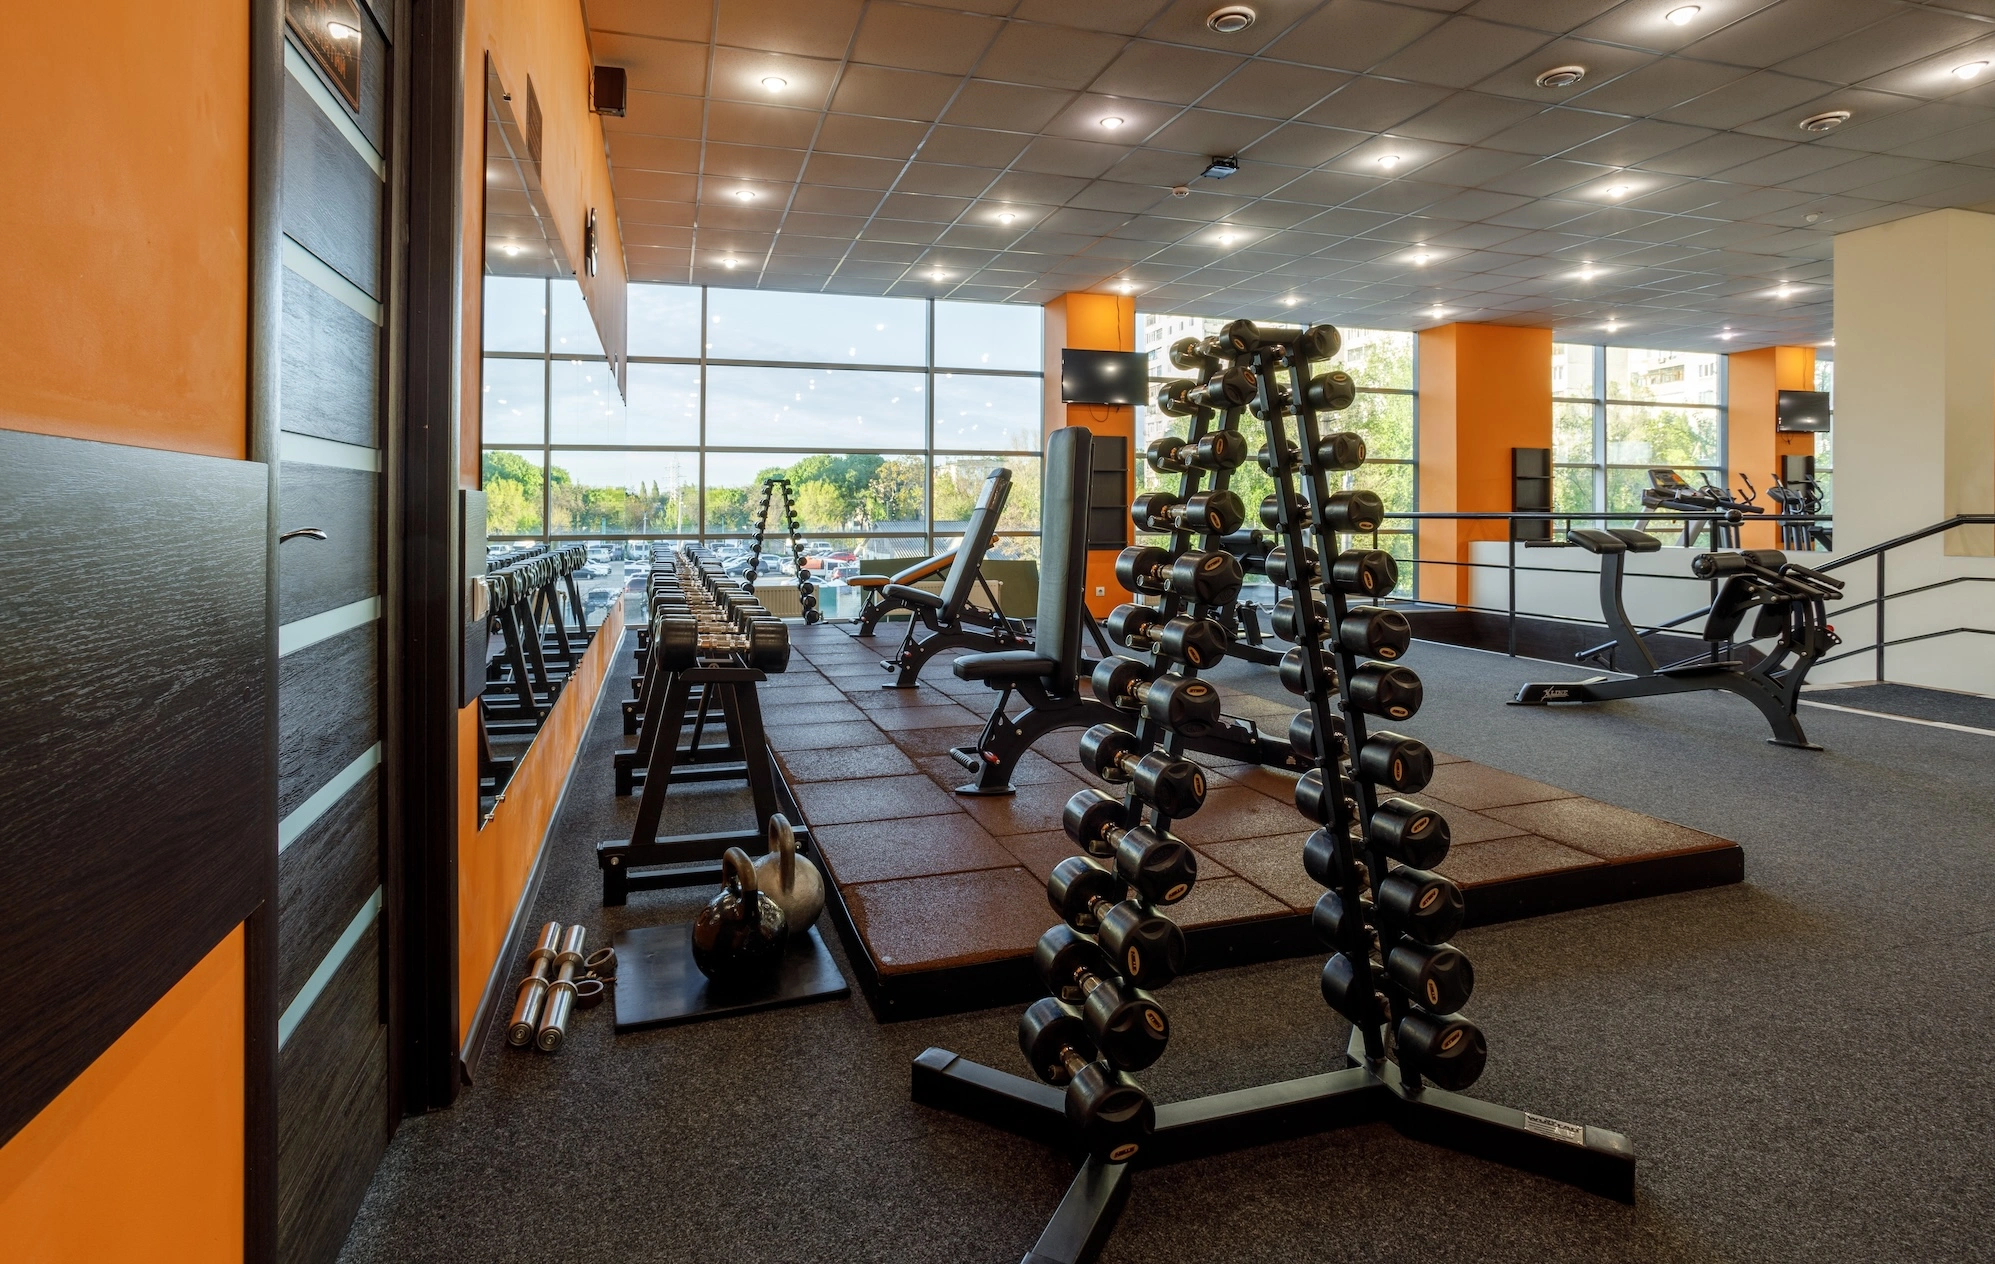 Gym and club software company Clubessential faces potential  billion sale